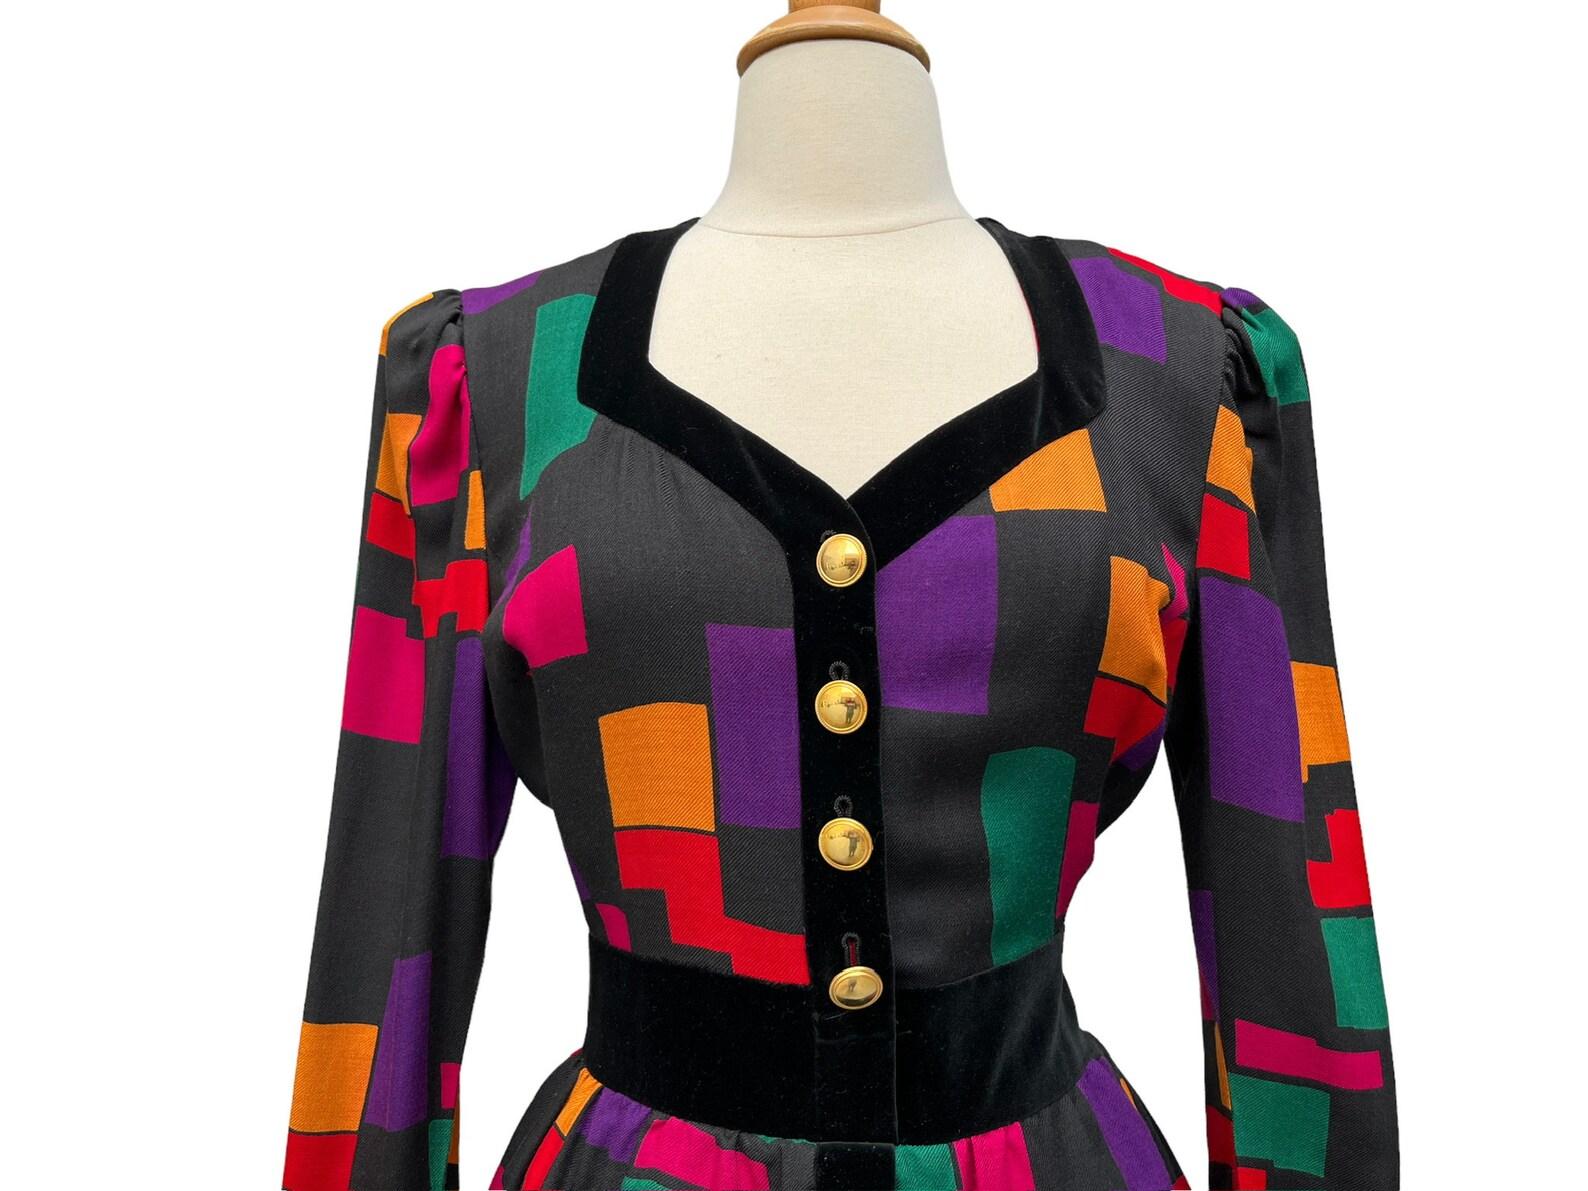 vintage Escada dress. Black wool with a colorful geometric pattern and bllack velvet trim. Gold buttons on the bodice. Peplum waist. Long sleeves with button cuffs. Dress falls to knee length. Back zip closure. Dress is lined, sleeves are